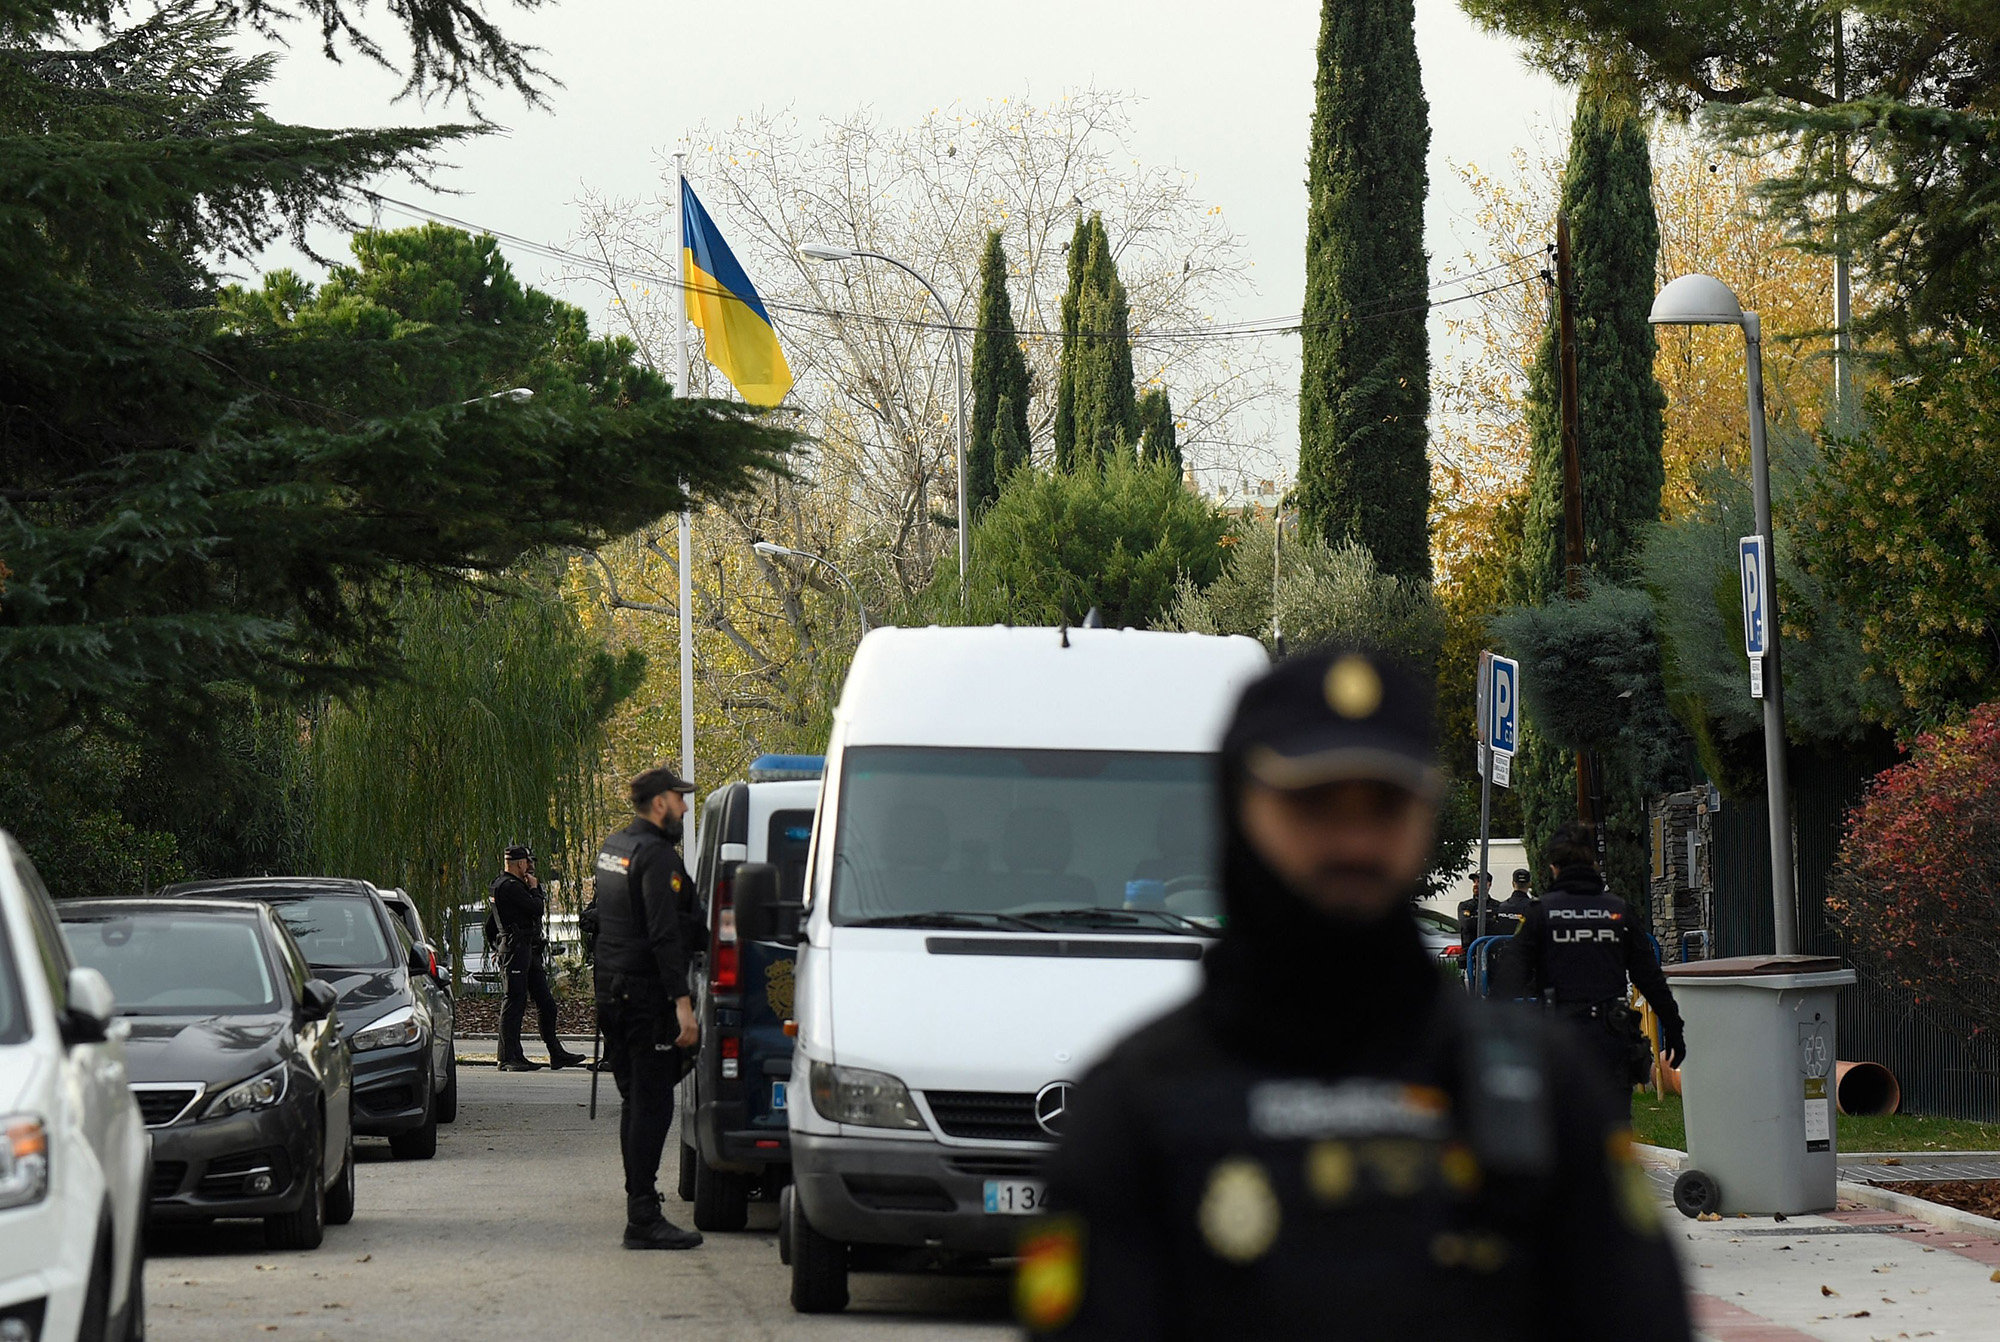 Spanish policemen stand next to an Ukrainian flag while securing the area after a letter bomb explosion at the Ukraine's embassy in Madrid, Spain, on November 30.